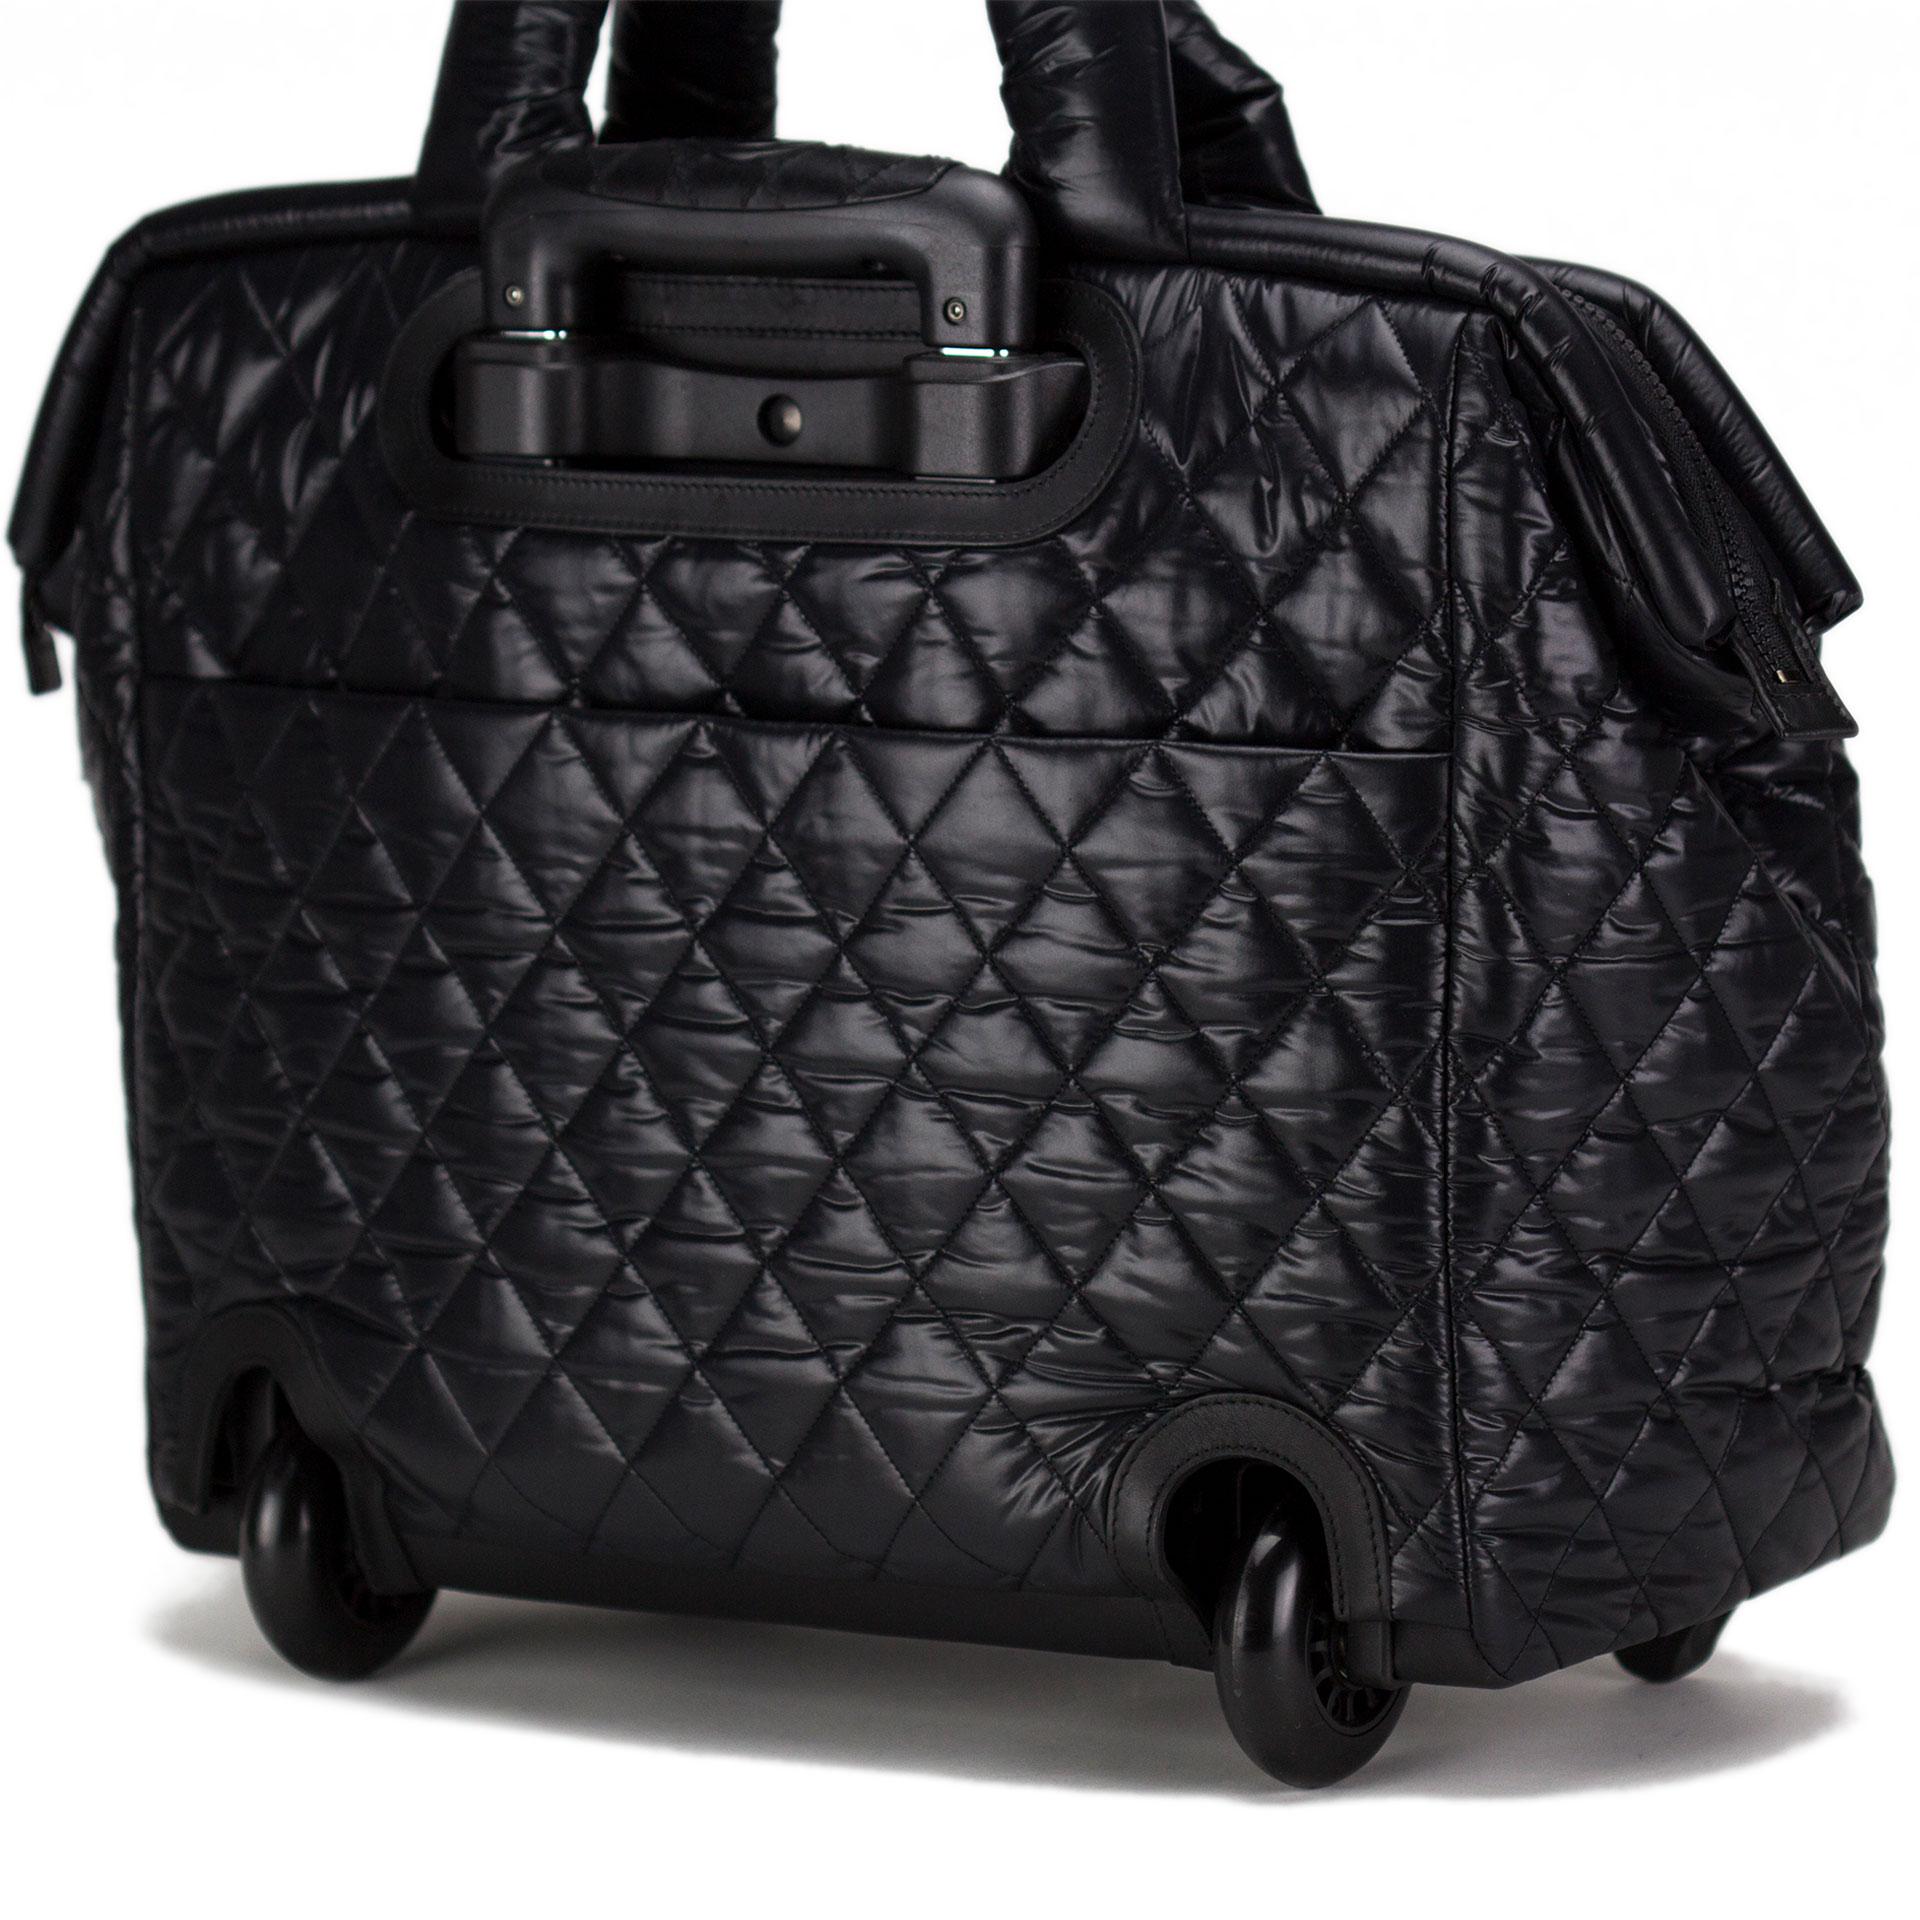 Chanel 2012 Coco Cocoon Quilted Case Carry On Trolley Travel Black Luggage Bag 5